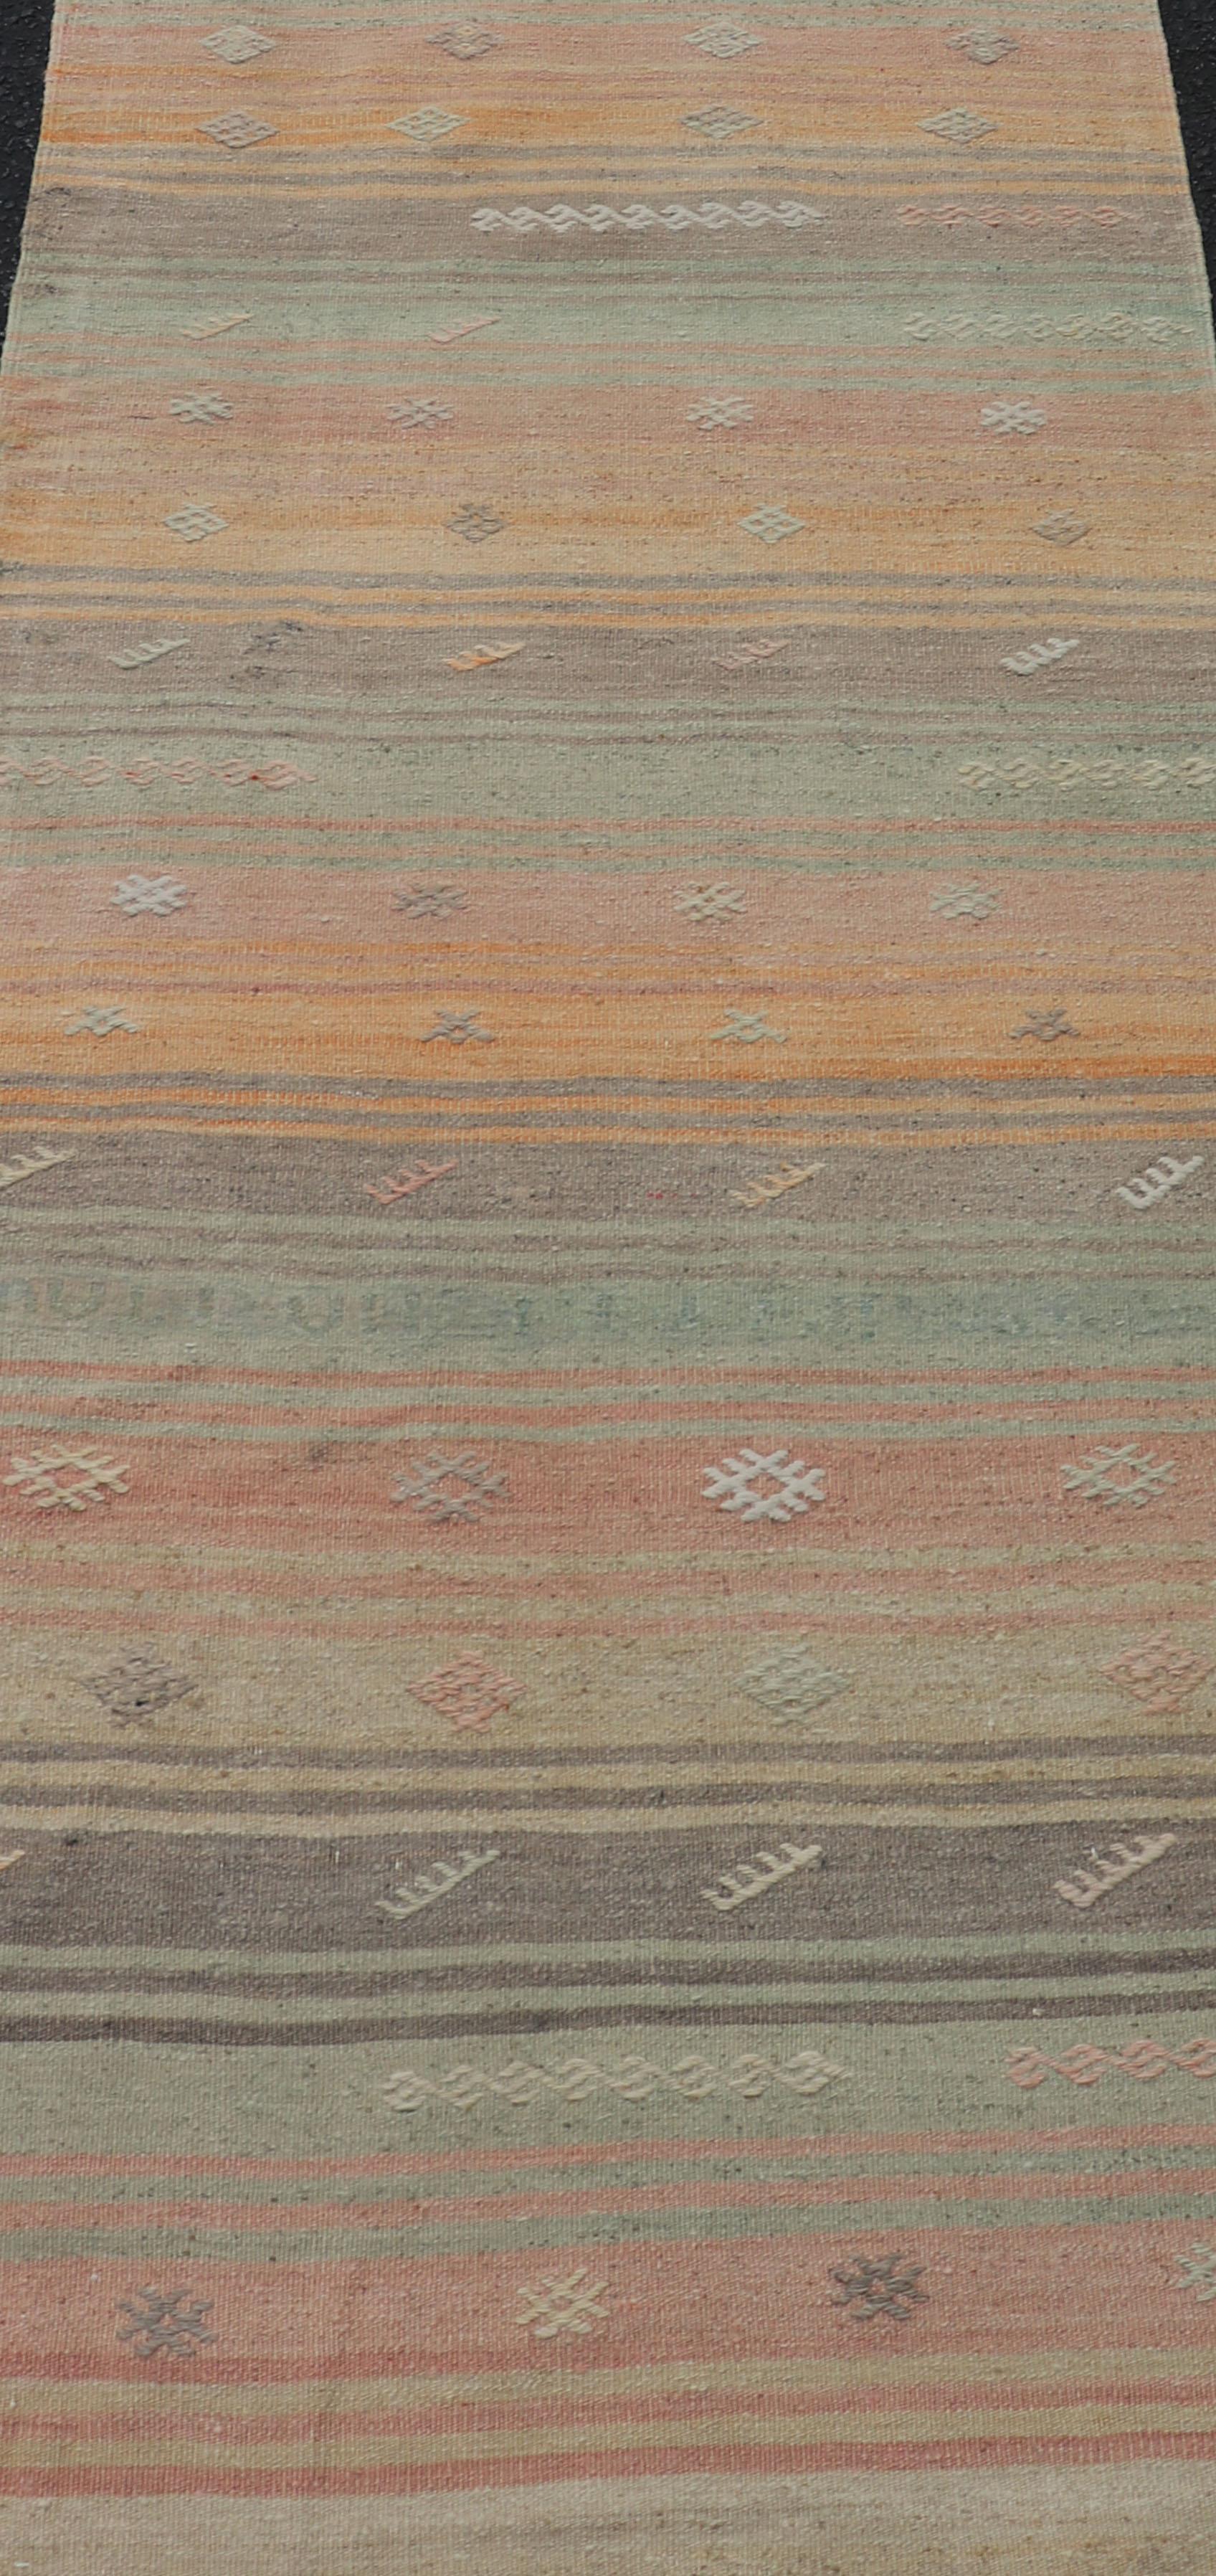 Wool Vintage Turkish Kilim Runner with Stripes in Multi Soft Colors For Sale